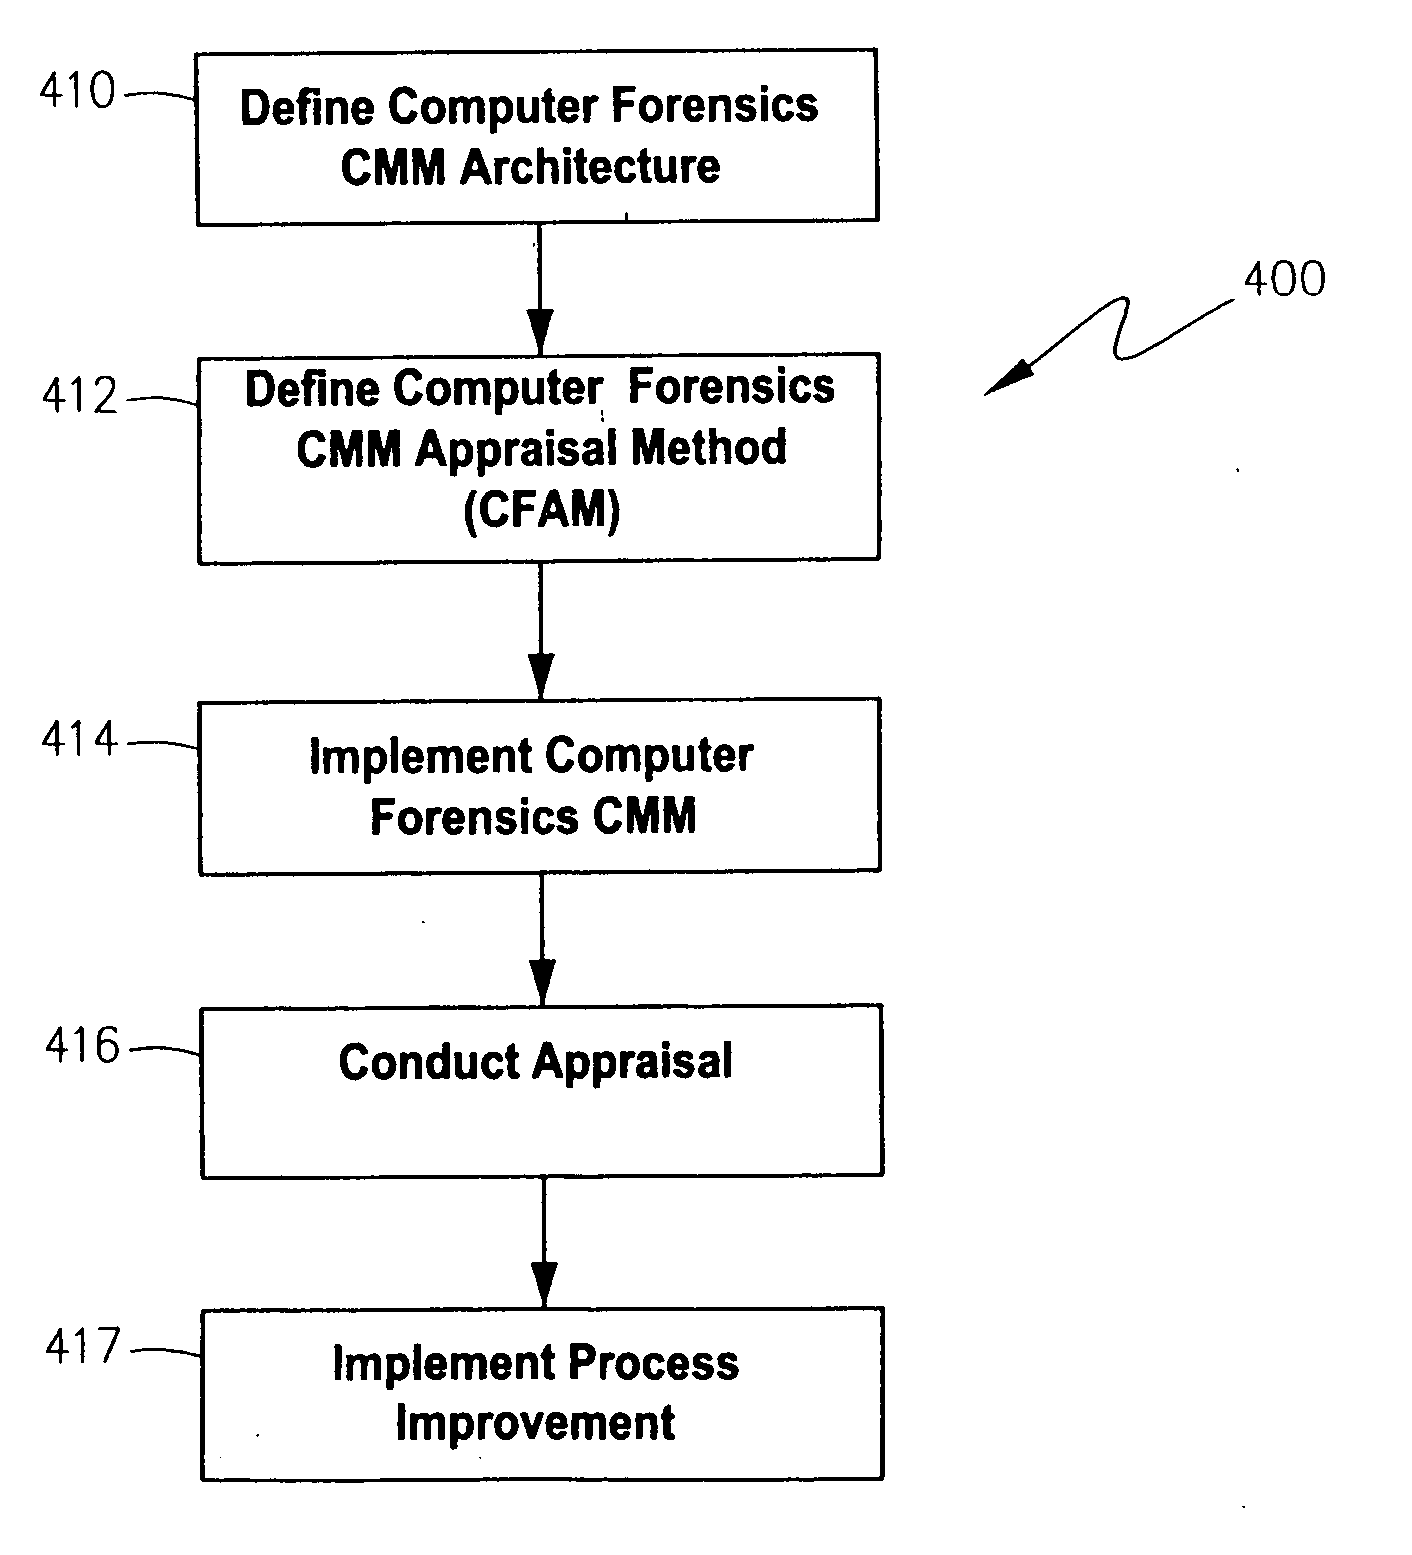 Methodology for assessing the maturity and capability of an organization's computer forensics processes